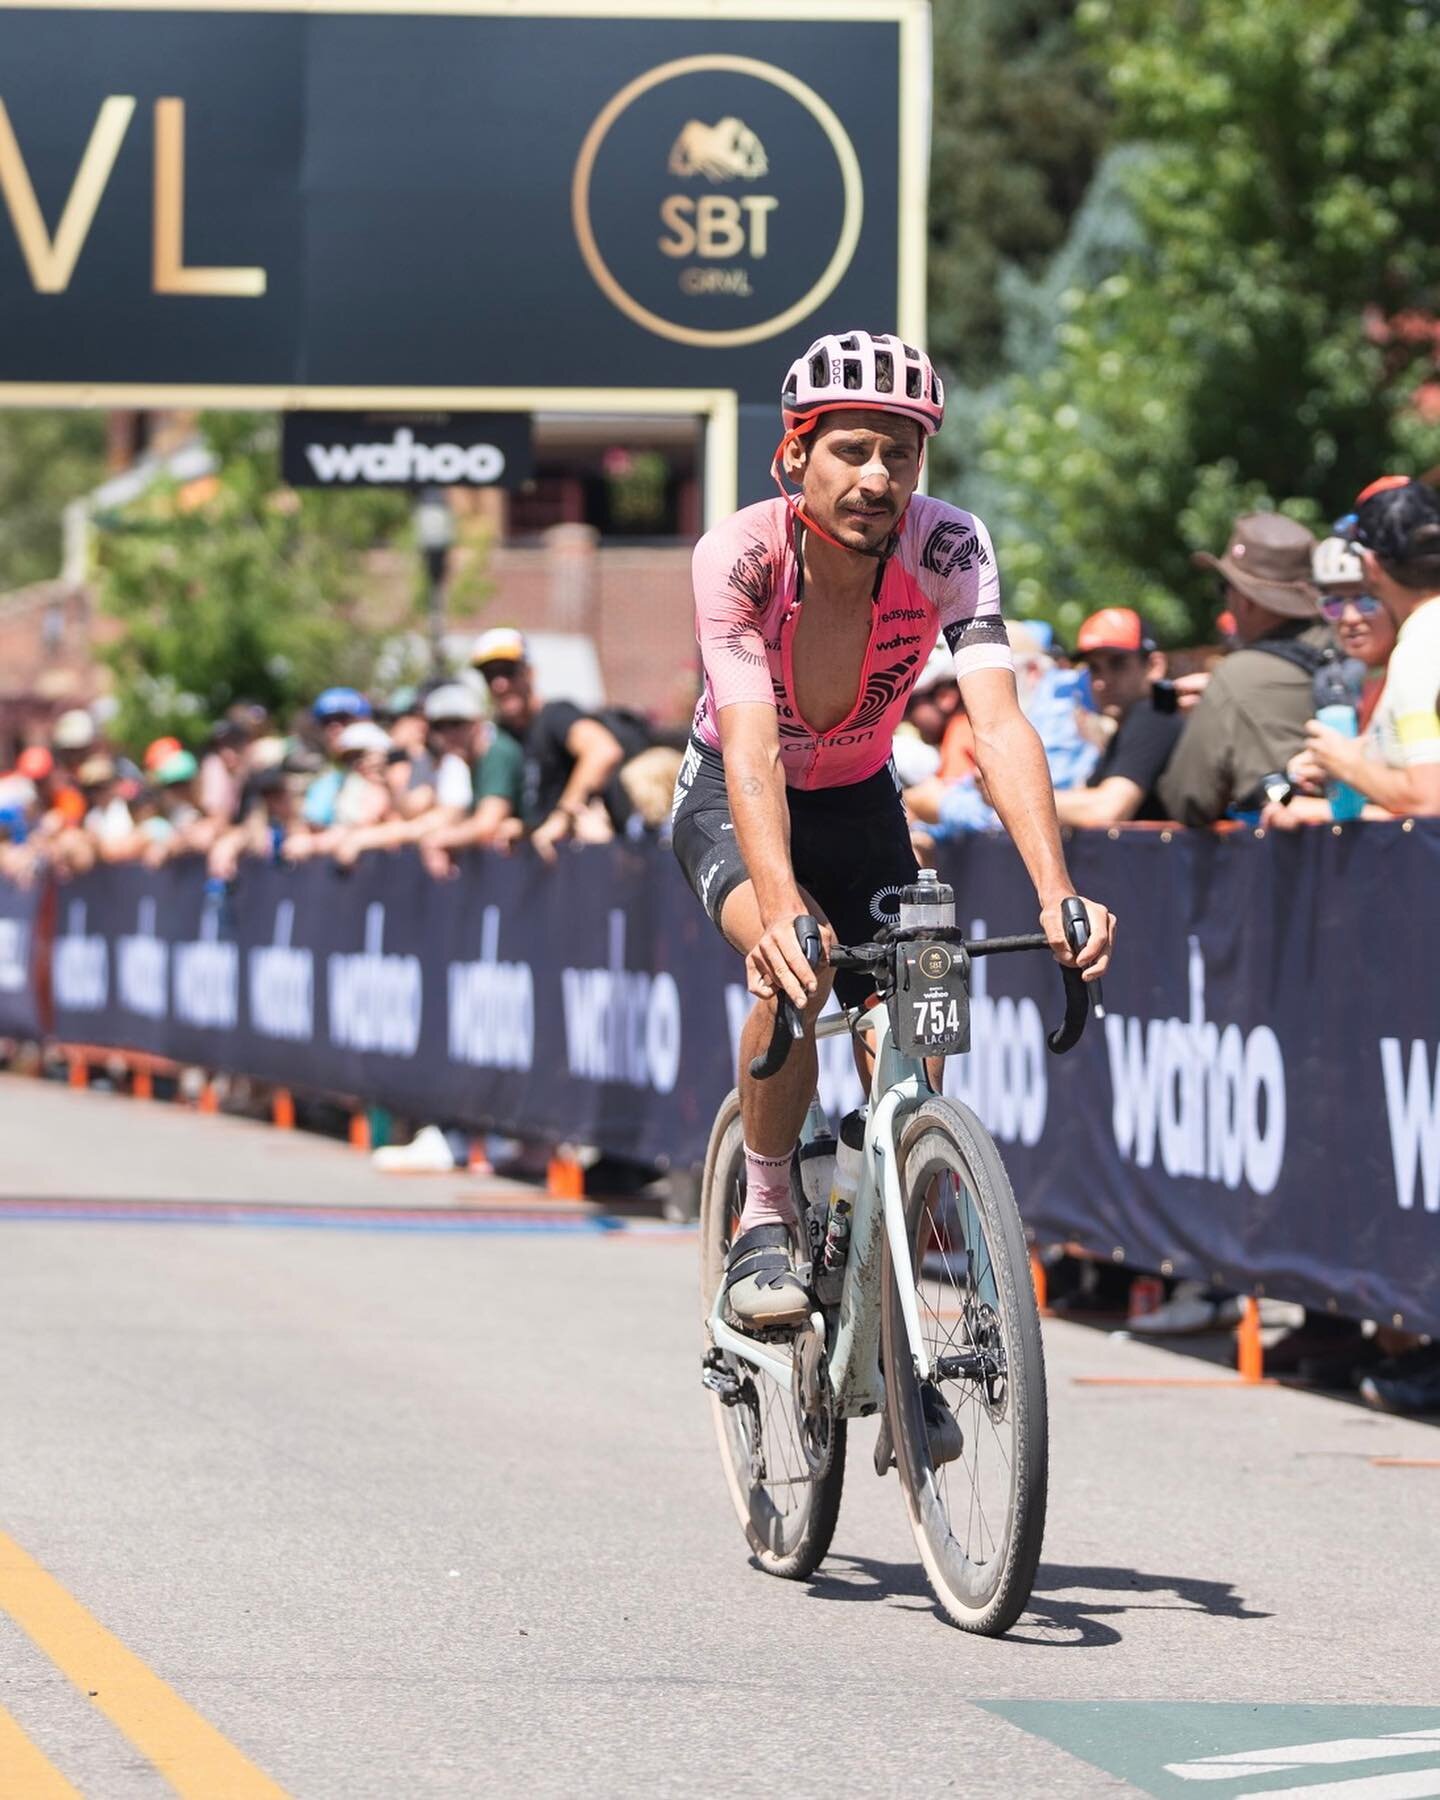 Lachlan has done it! 🙌 #LeadBreckBoatDivide After racing Leadville, winning Breck Epic, and finishing in the money at SBT GRVL, @lachlanmorton headed from Steamboat to Canada and has just finished the 2,745 mile Tour Divide in record time. Here&rsqu